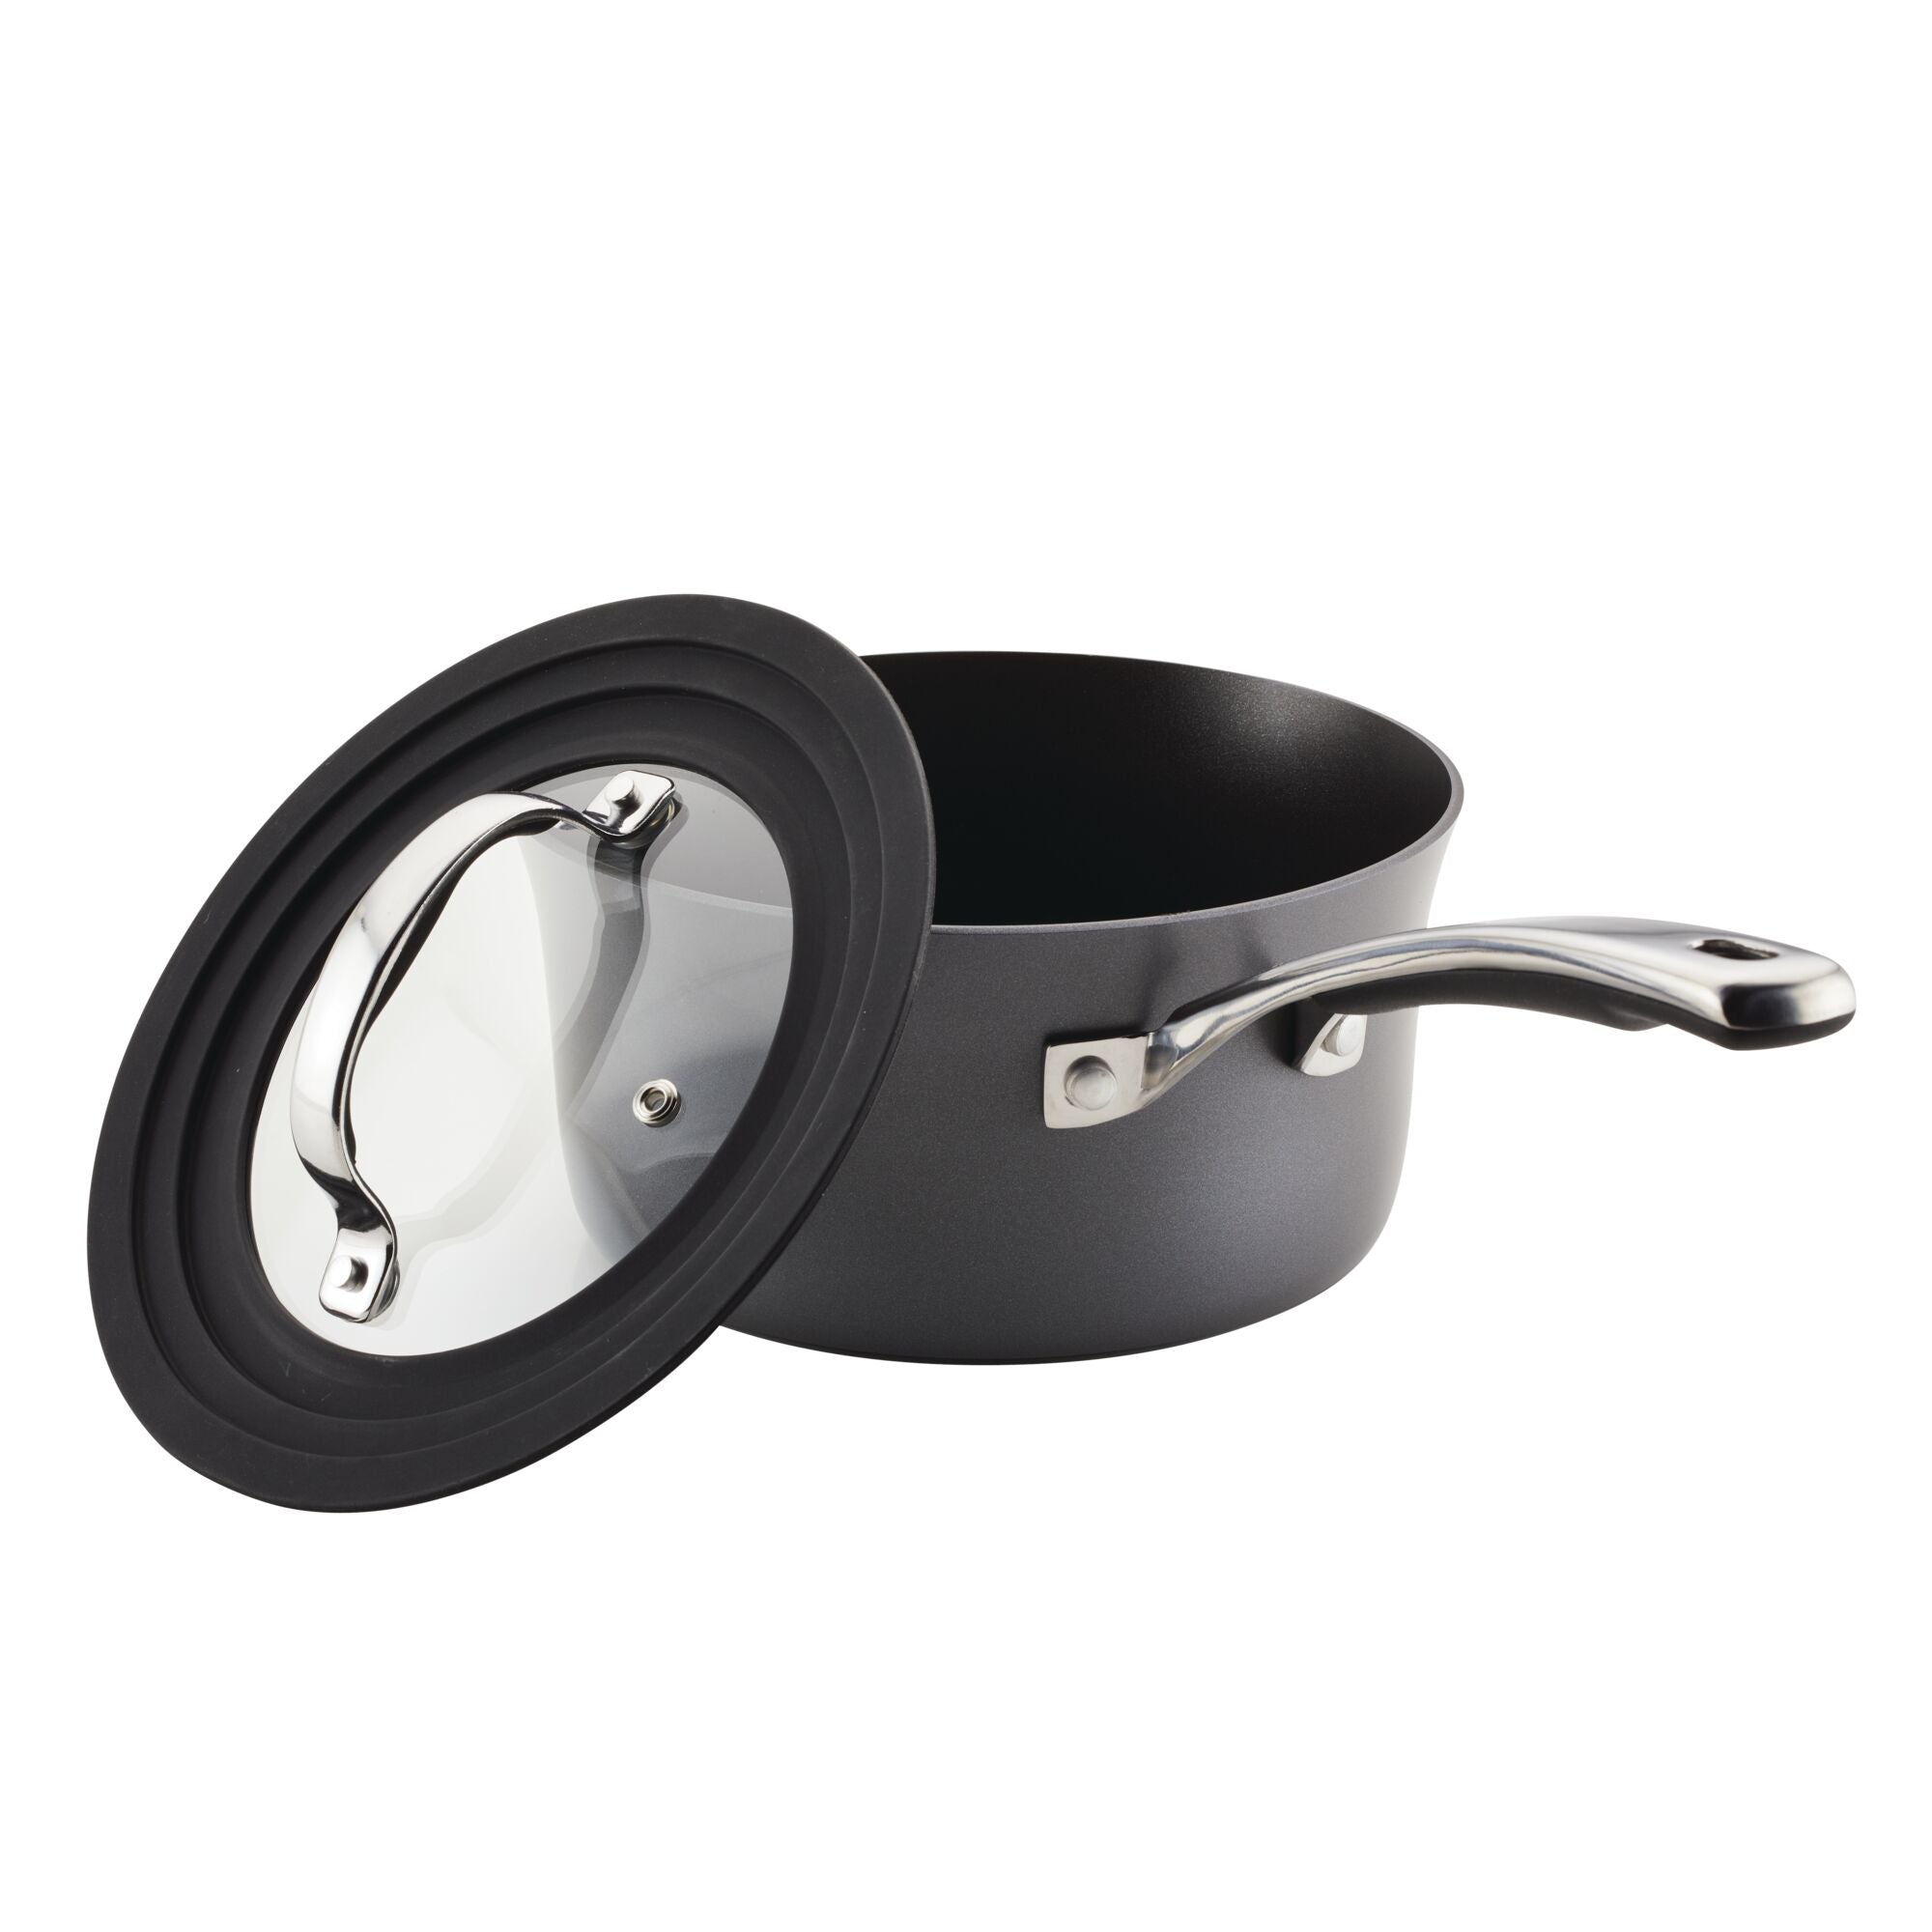 Electric Skillet by Cucina Pro - 18/10 Stainless Steel with Tempered Glass Lid 12 Round